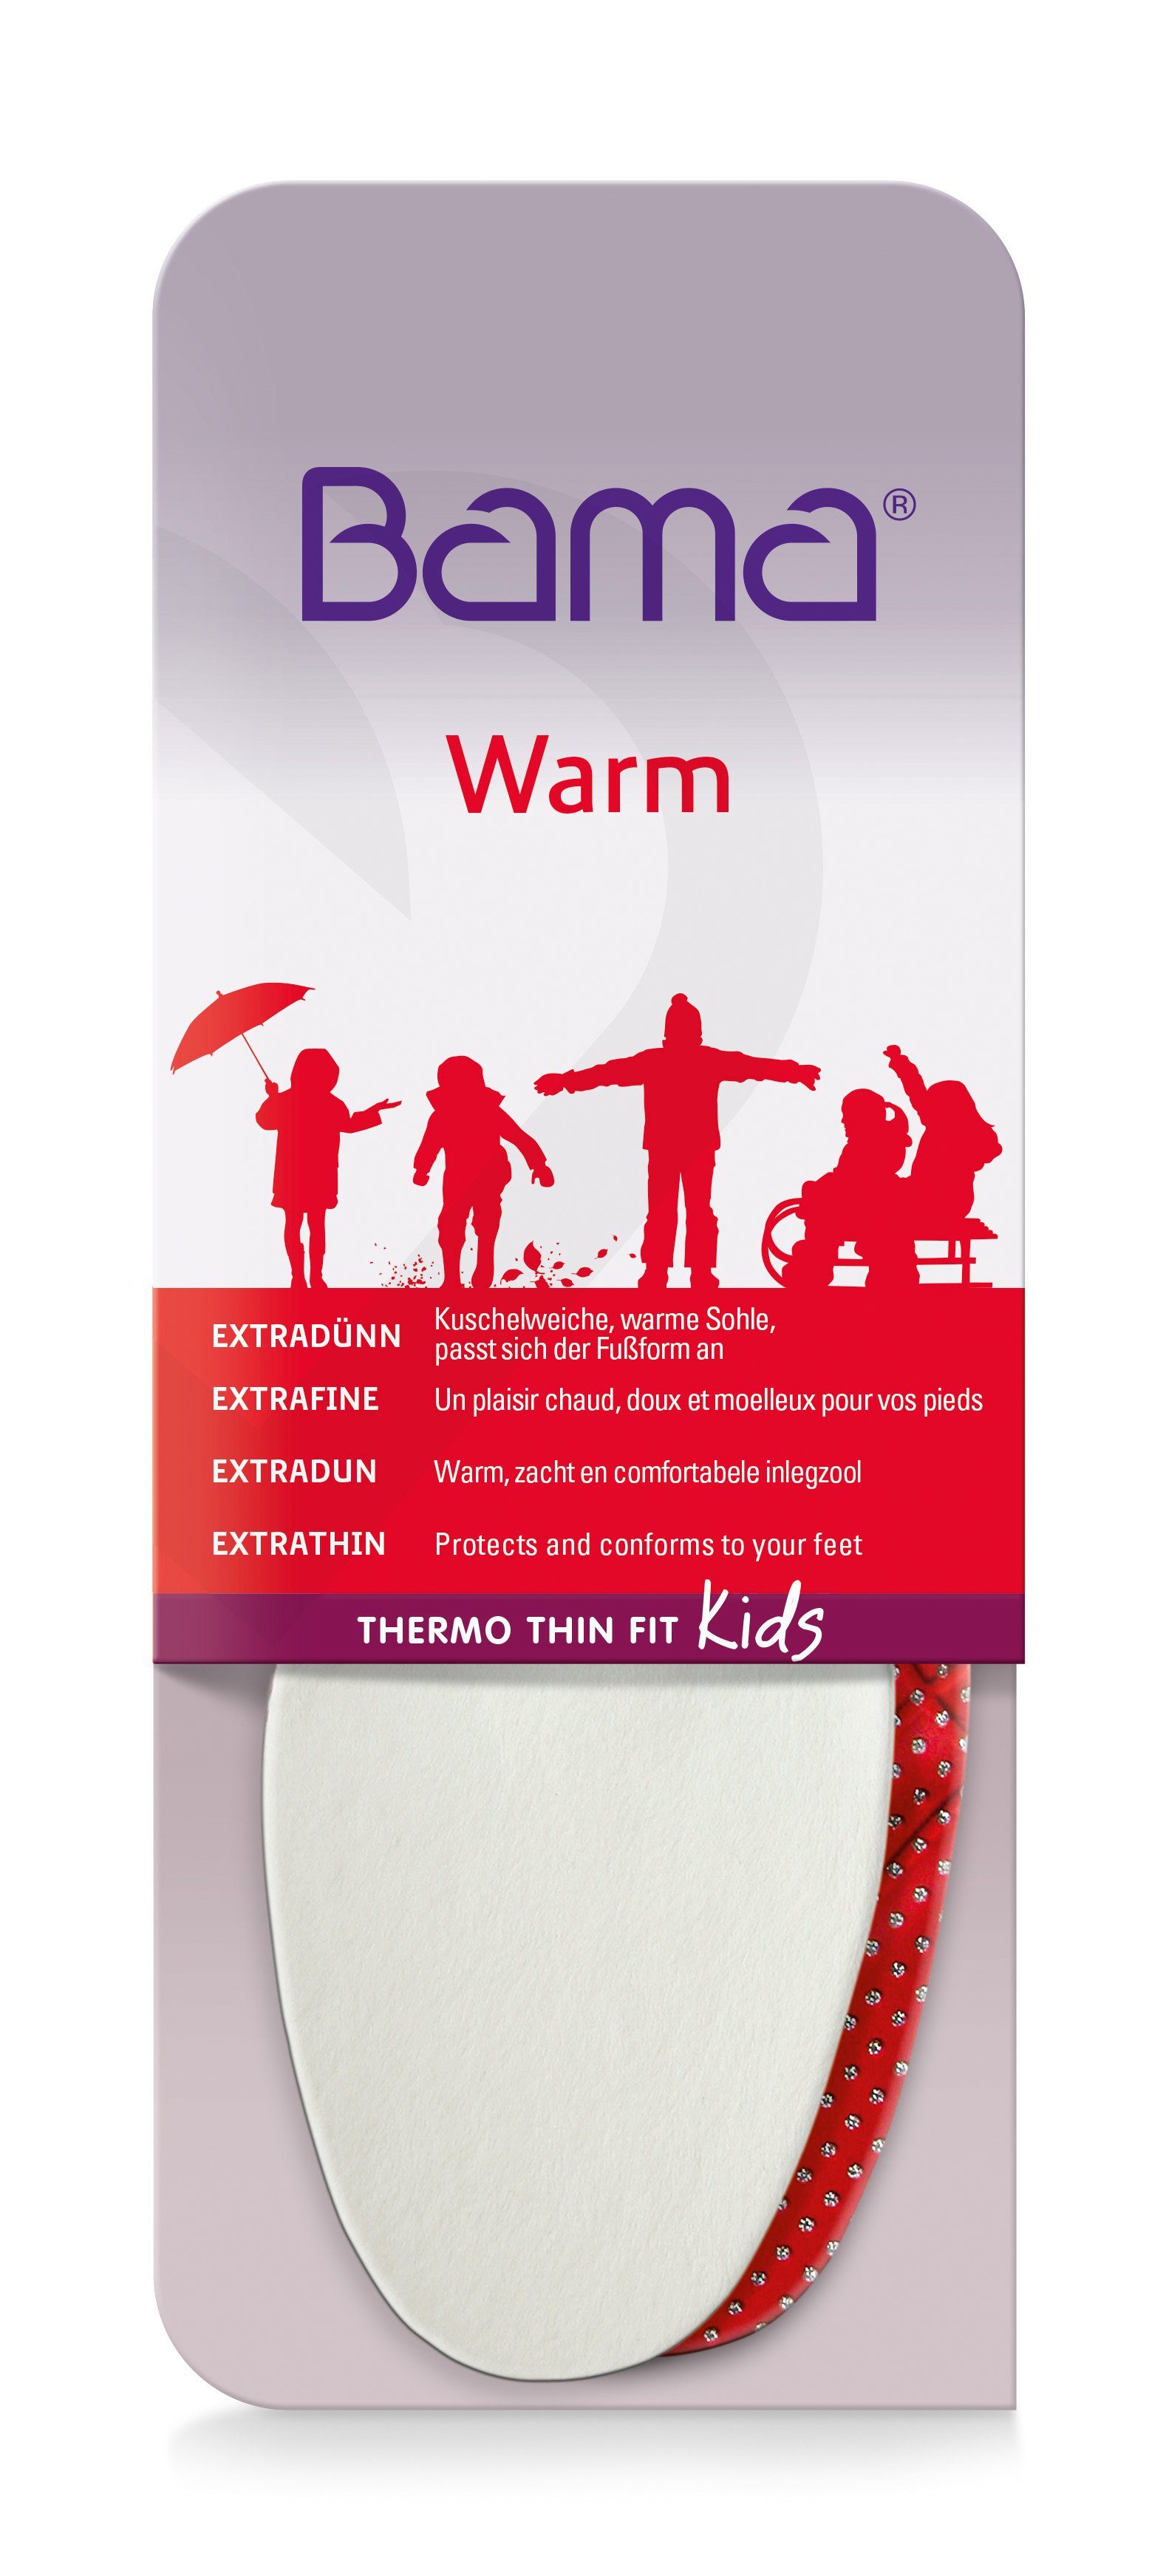 BAMA Group Thermosohlen Thermo Thin Fit Kids - Extradünne warme Sohle für Kinder